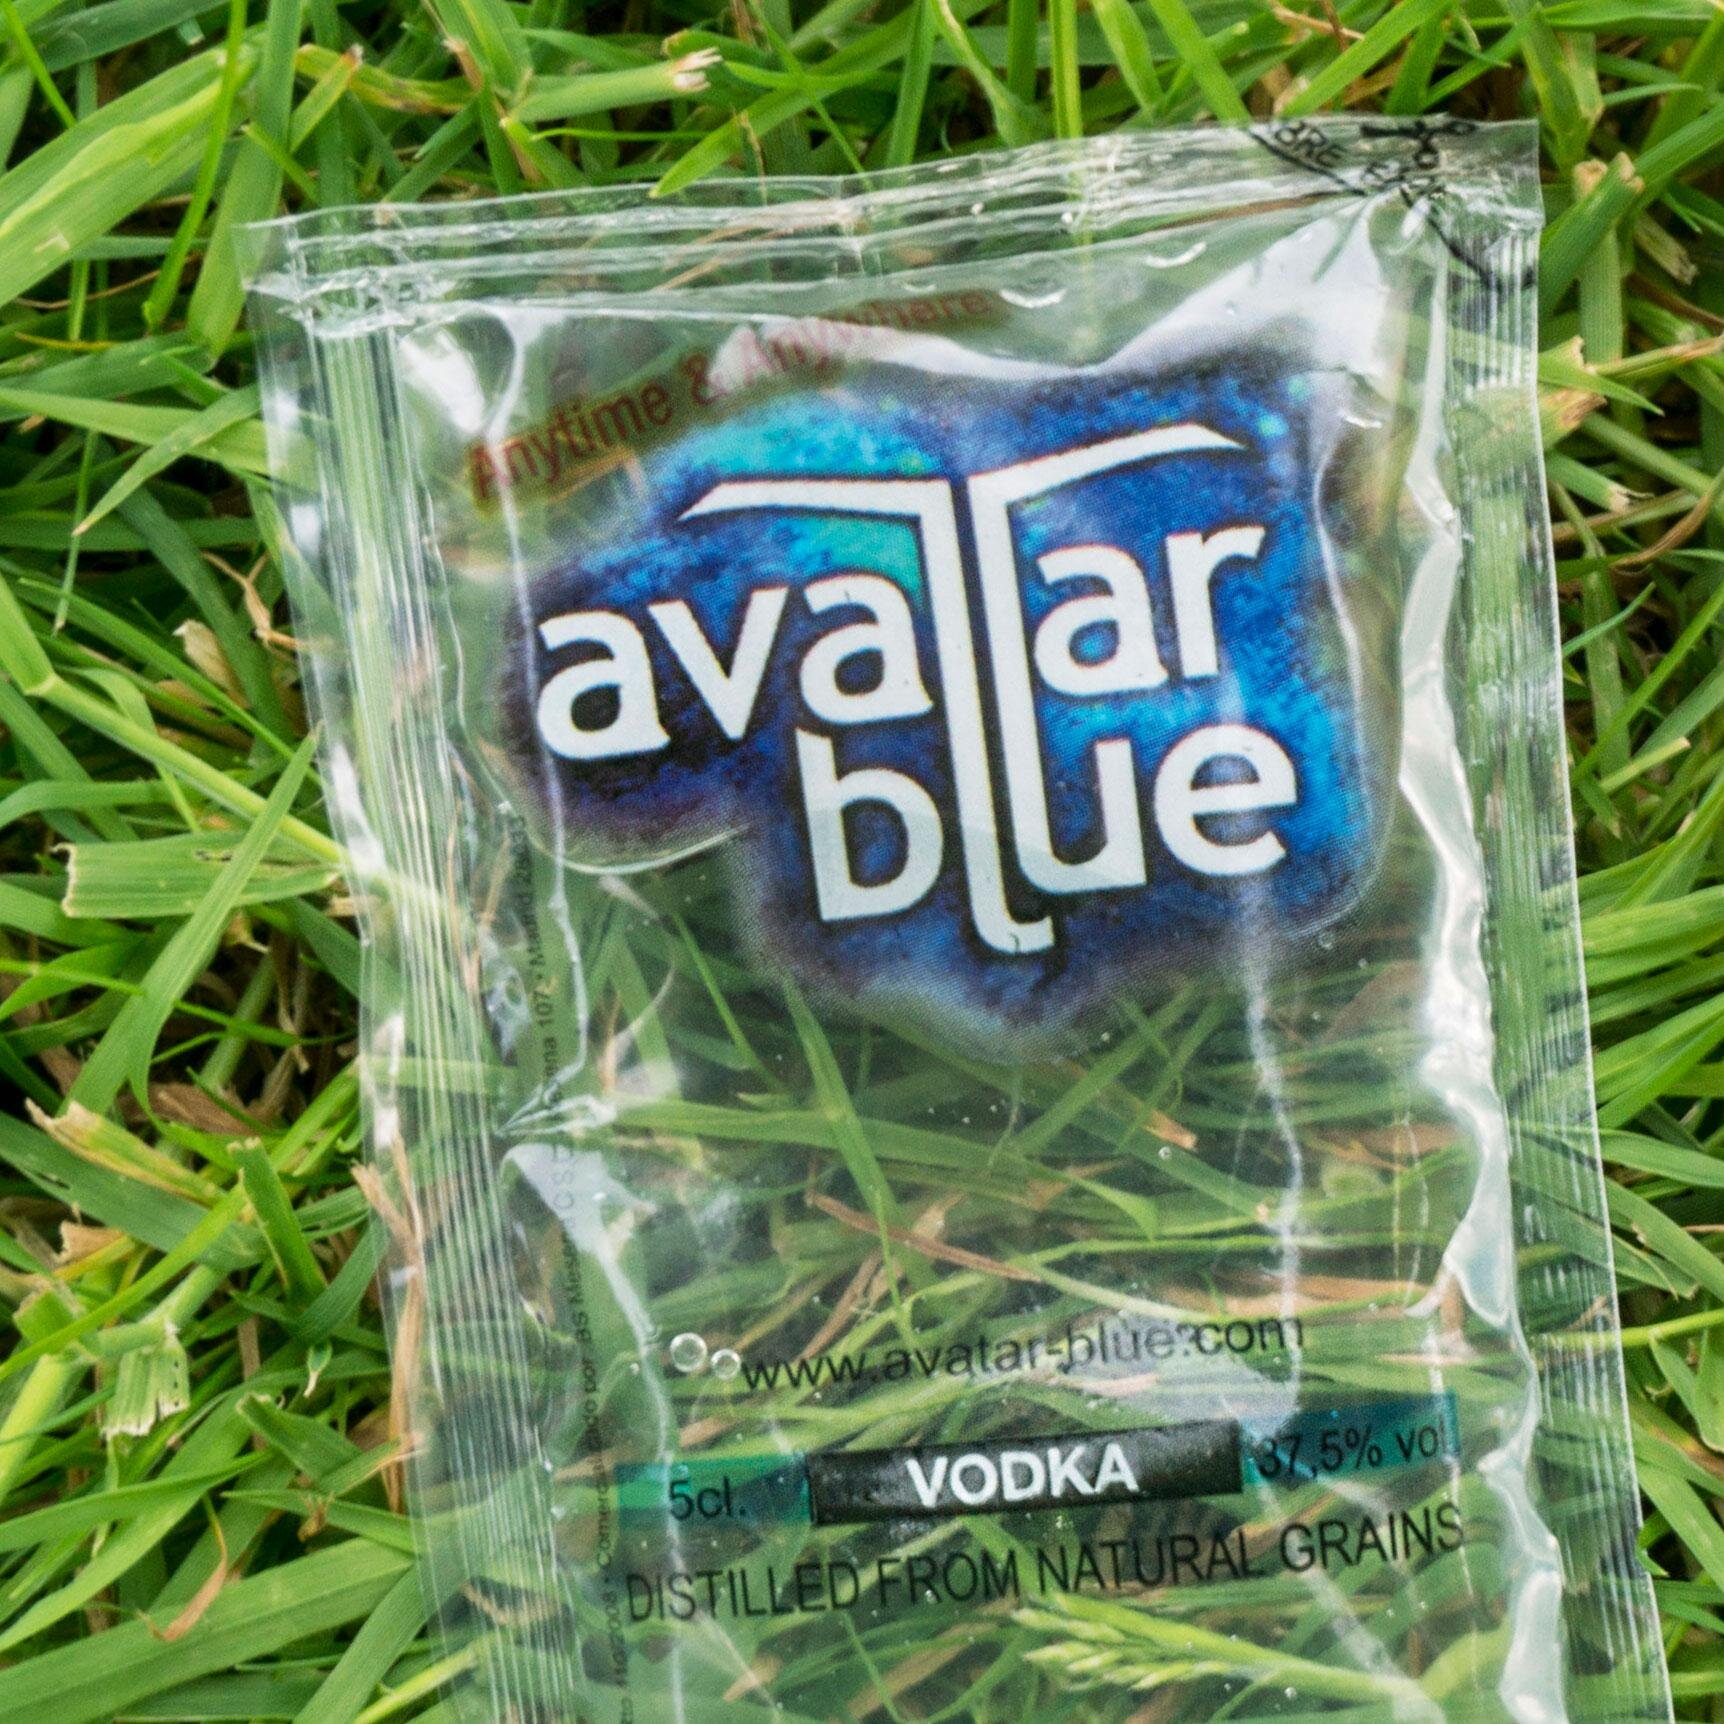 Fabulous vodka pouches: unbreakable and perfect for festivals, outdoor parties or full on picnics.